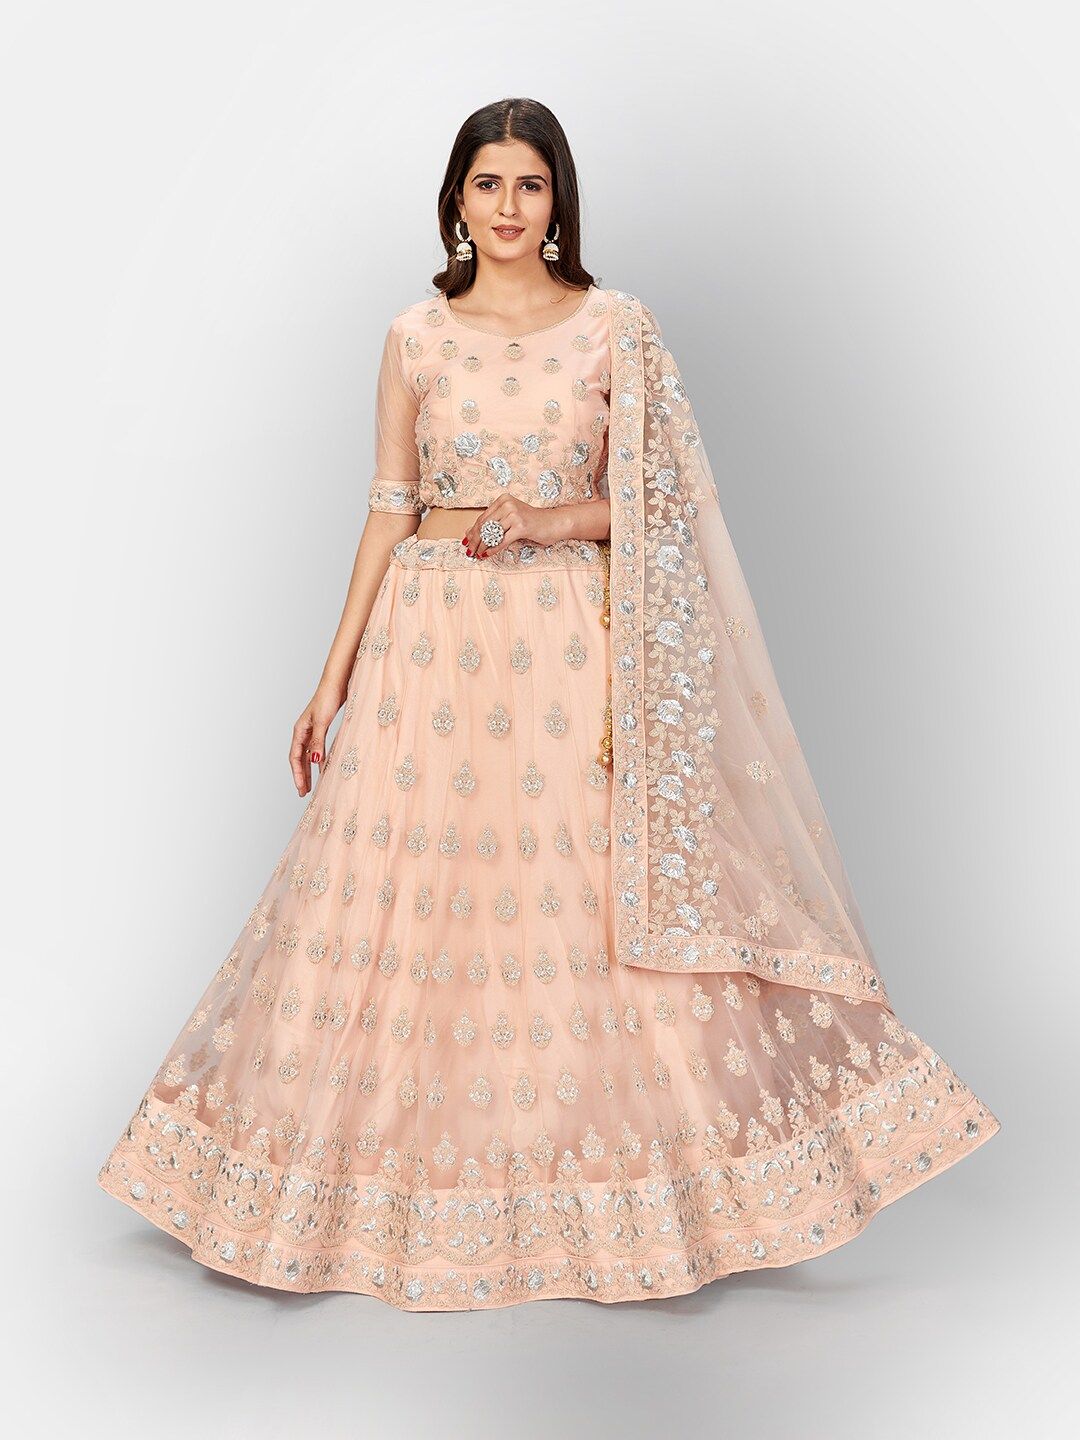 SHOPGARB Peach-Coloured & Silver-Toned Embroidered Thread Work Semi-Stitched Lehenga & Unstitched Blouse Price in India